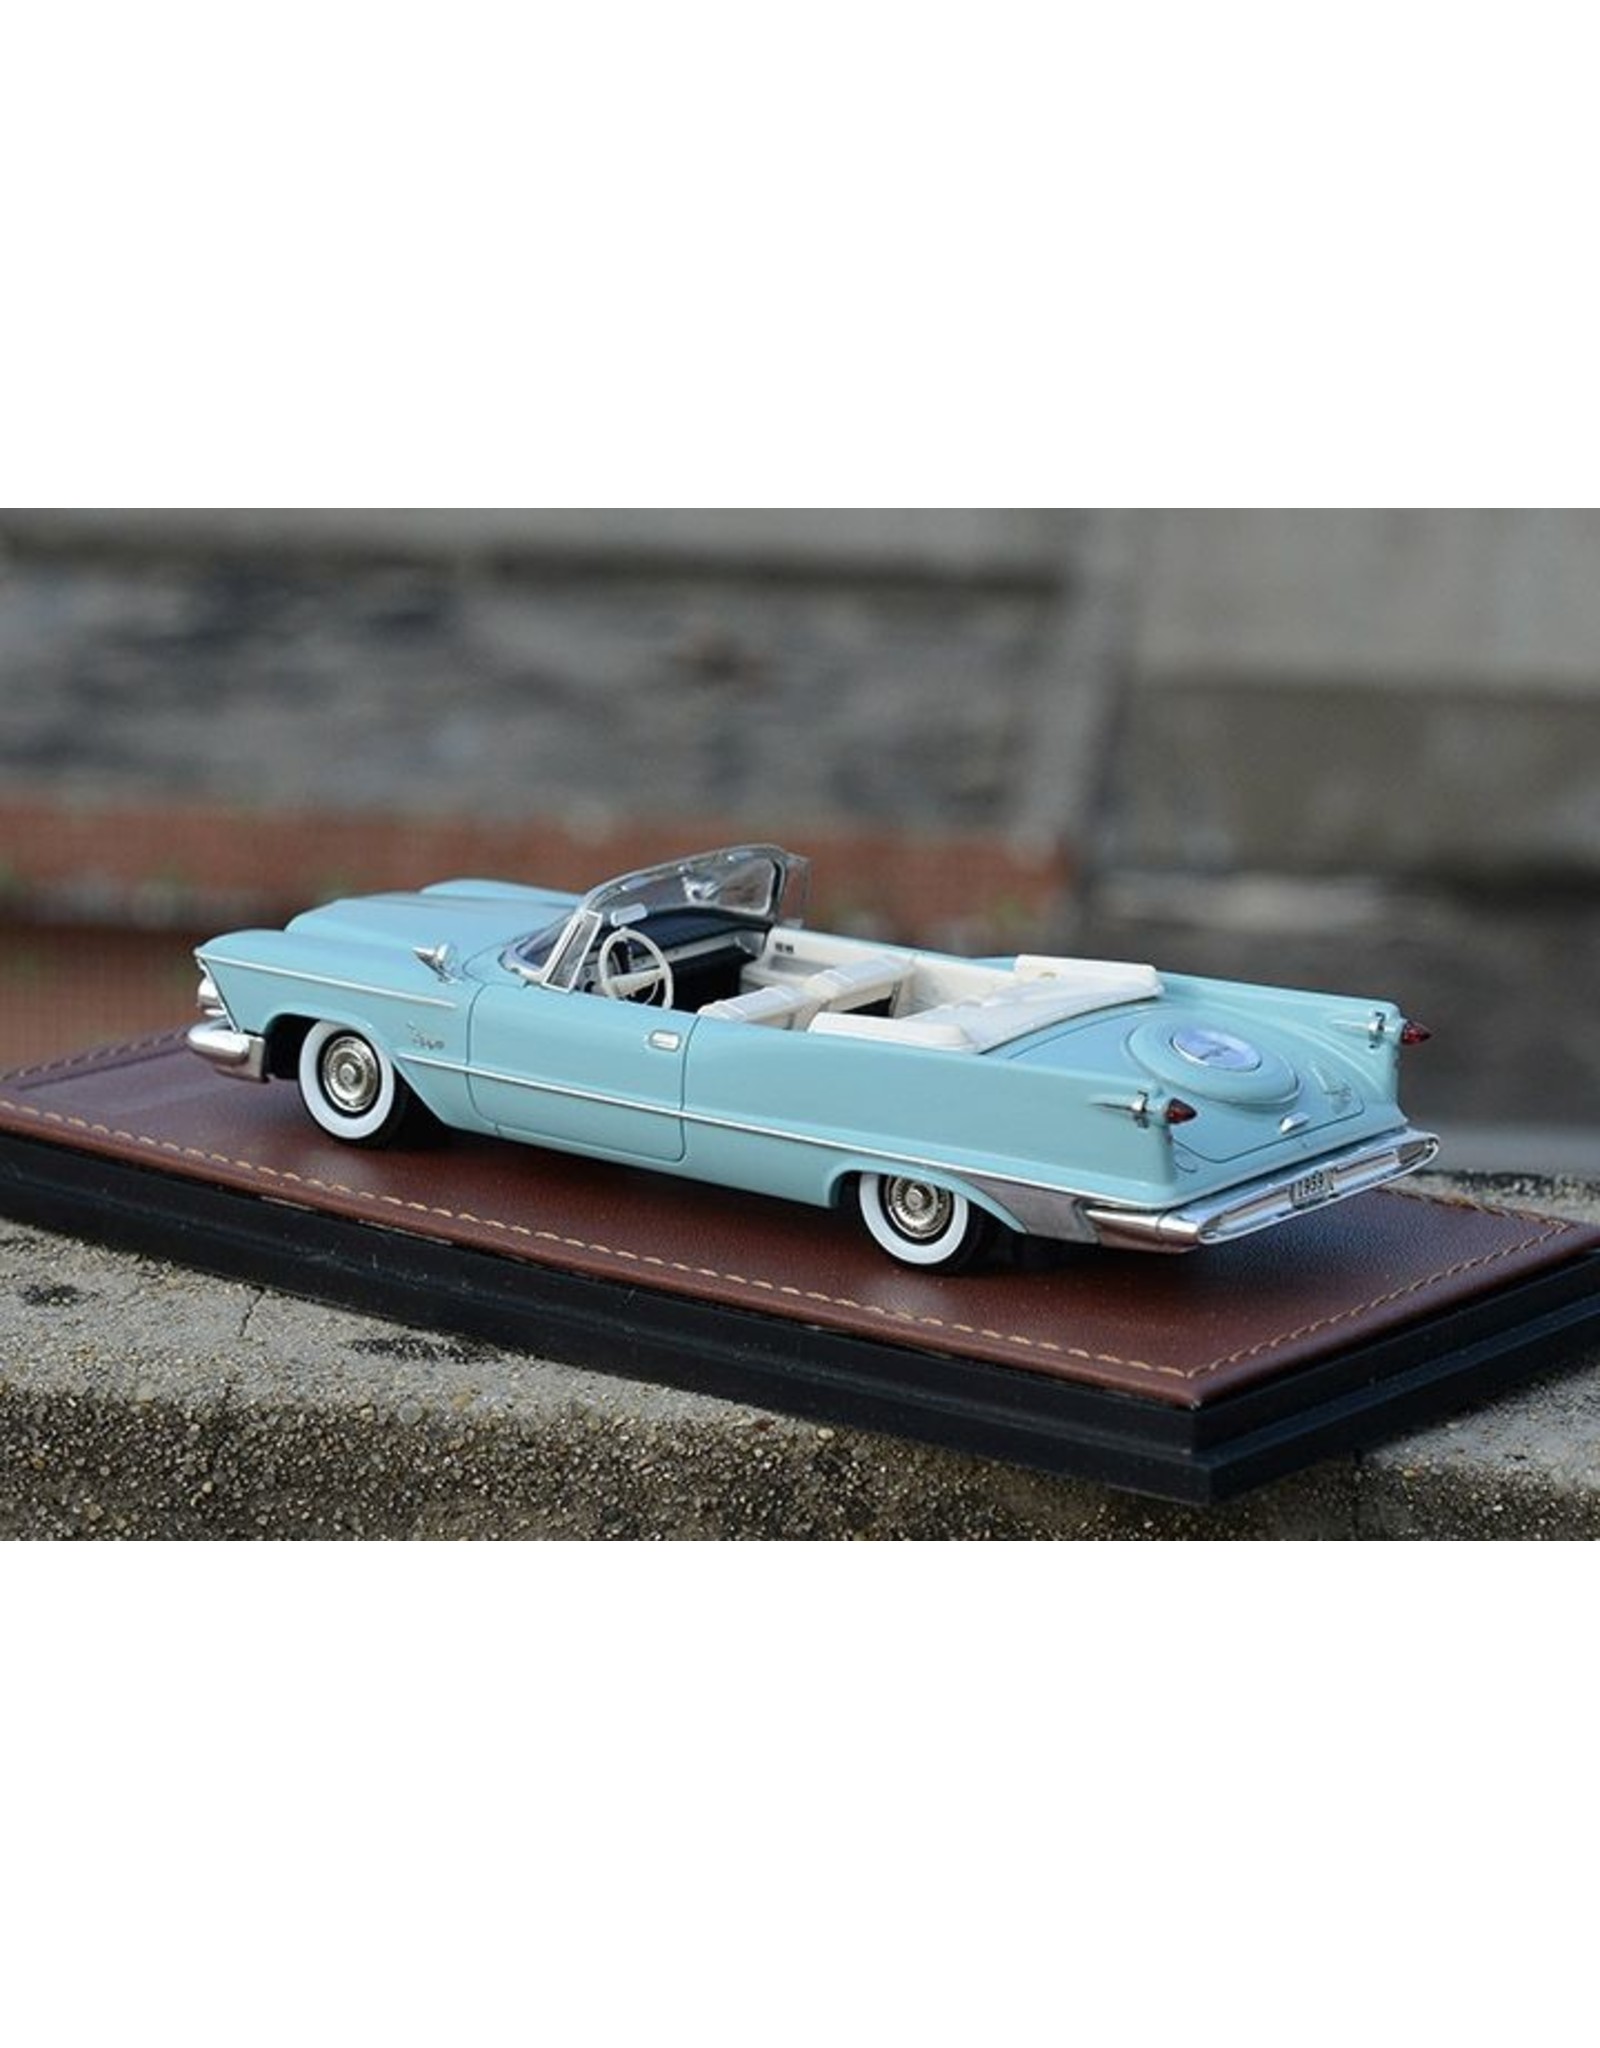 Imperial(Chrysler) Imperial Crown convertible(1959)open top(Normandy blue).